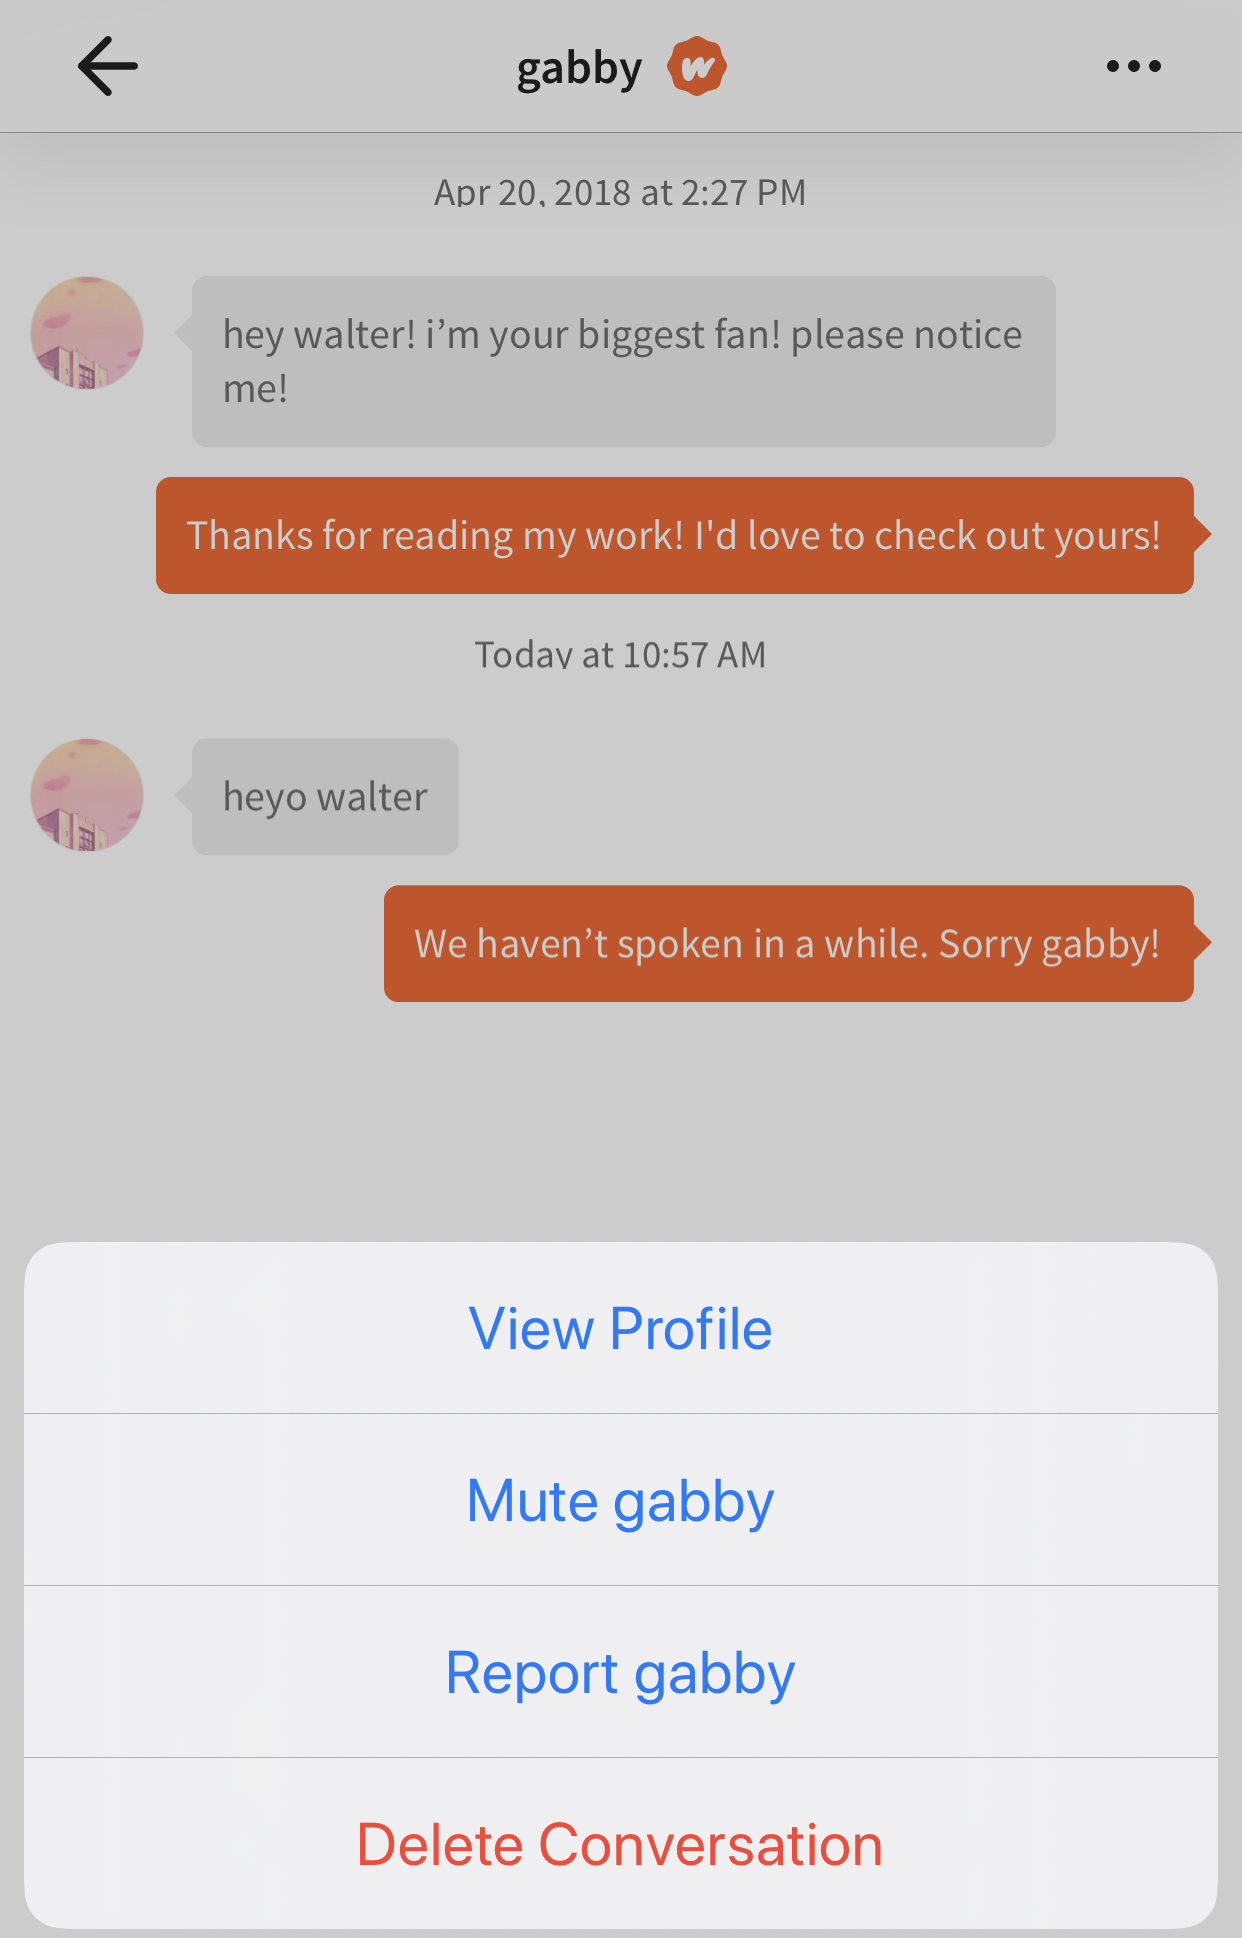 messenger private message